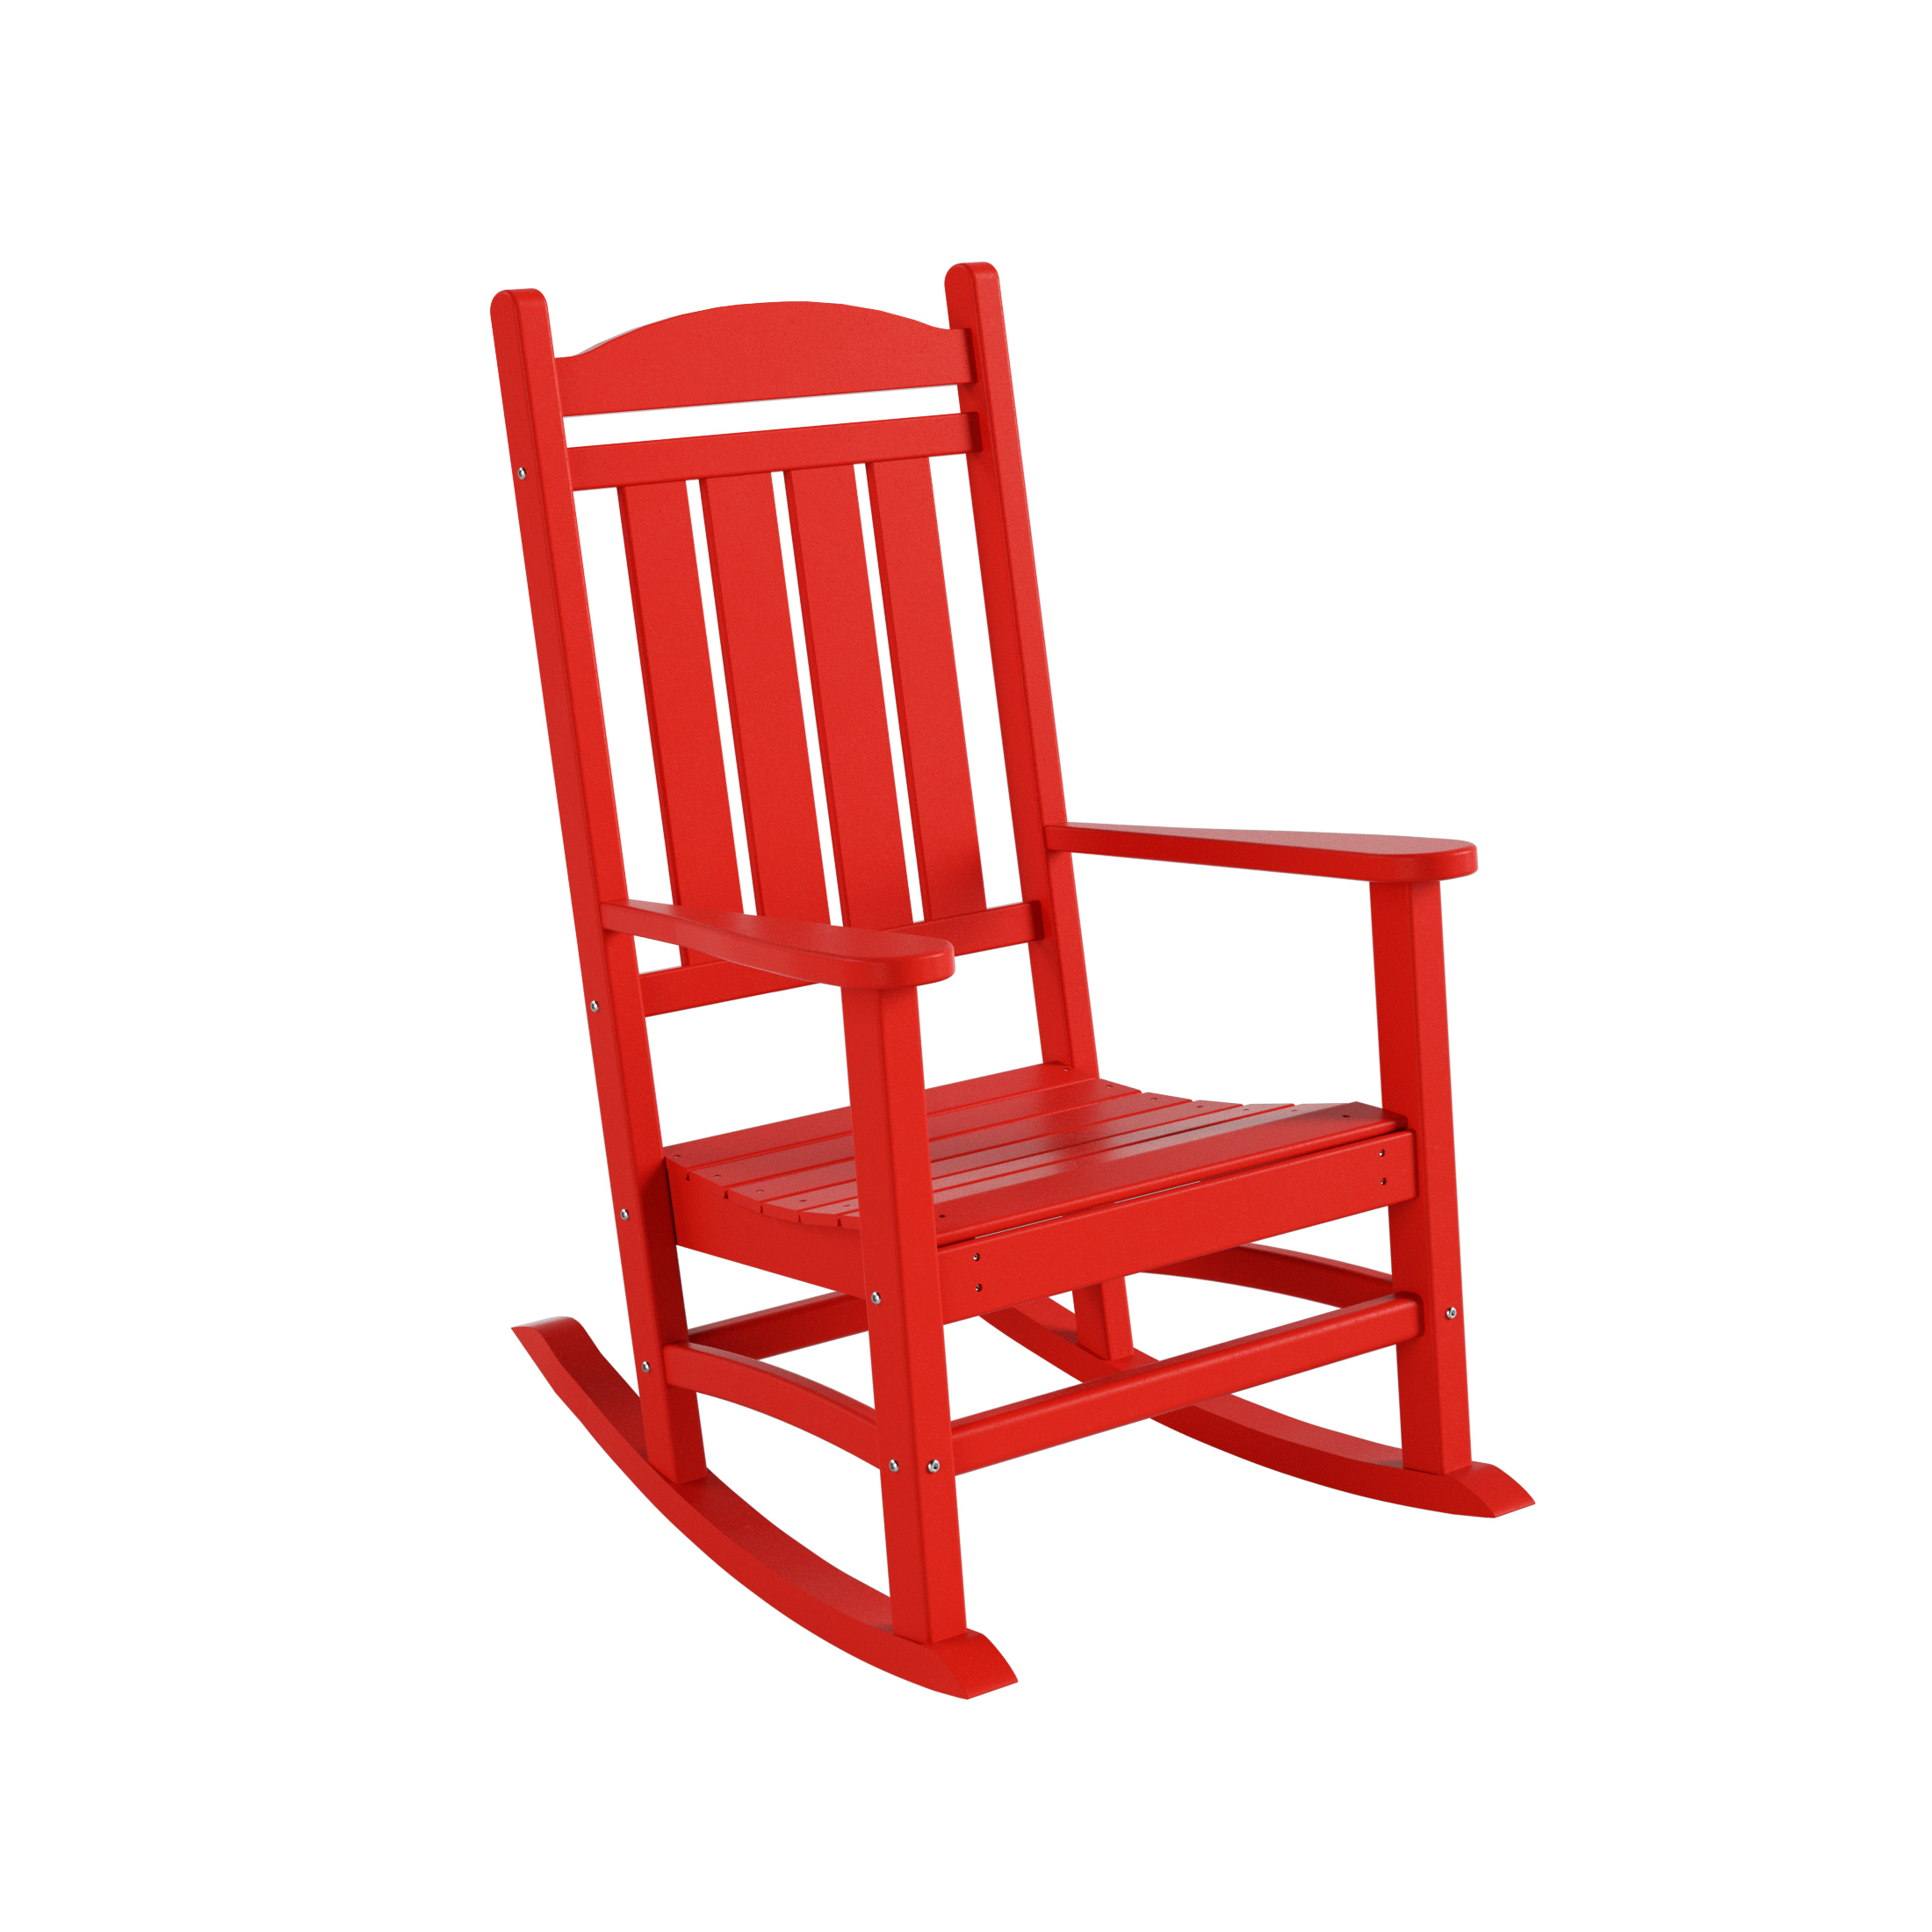 GARDEN 2-Piece Set Classic Plastic Porch Rocking Chair with Round Side Table Included, Red - image 4 of 7